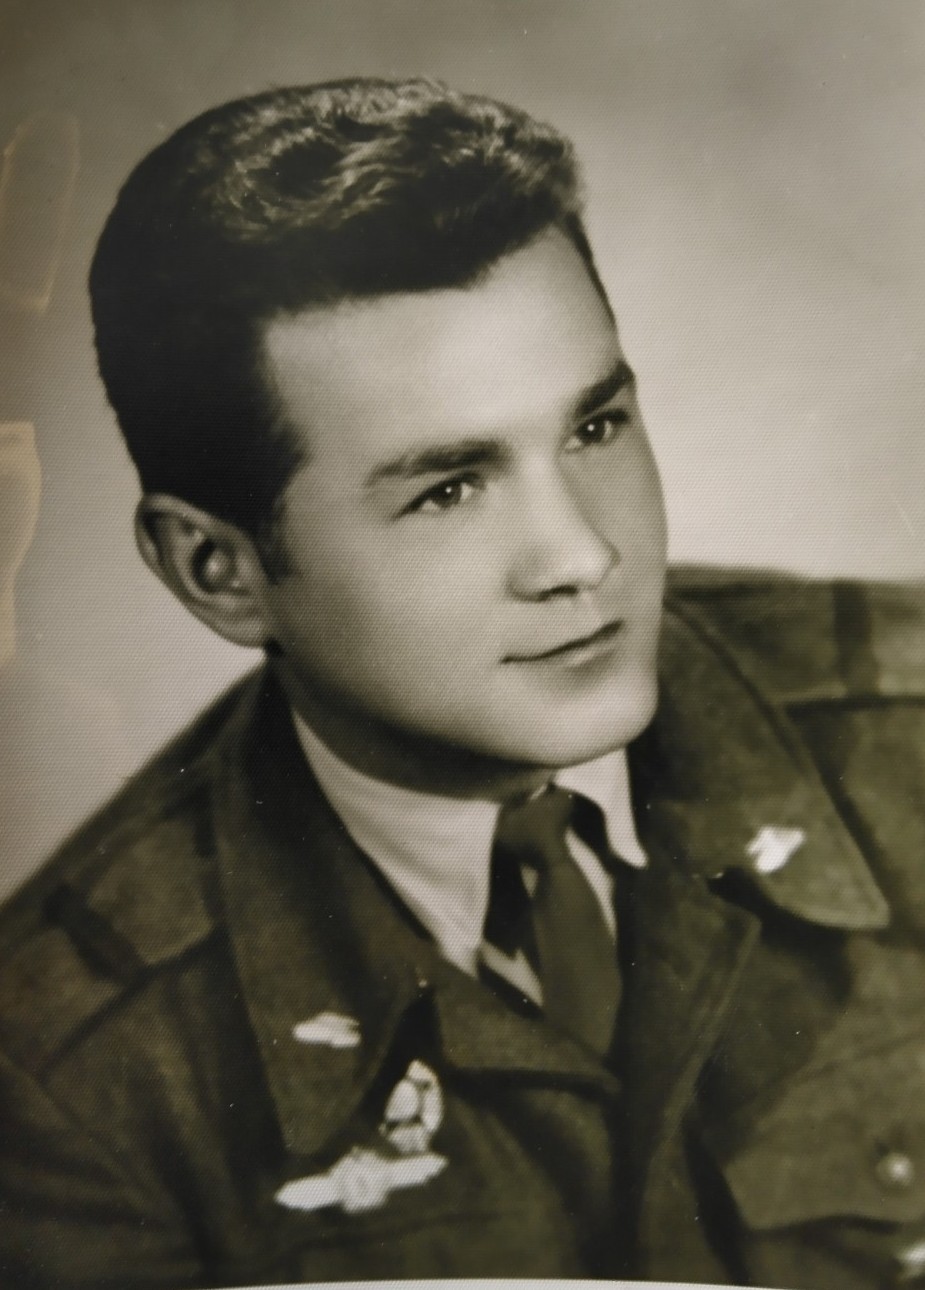 Jan Hanzlík during his military service in 1963